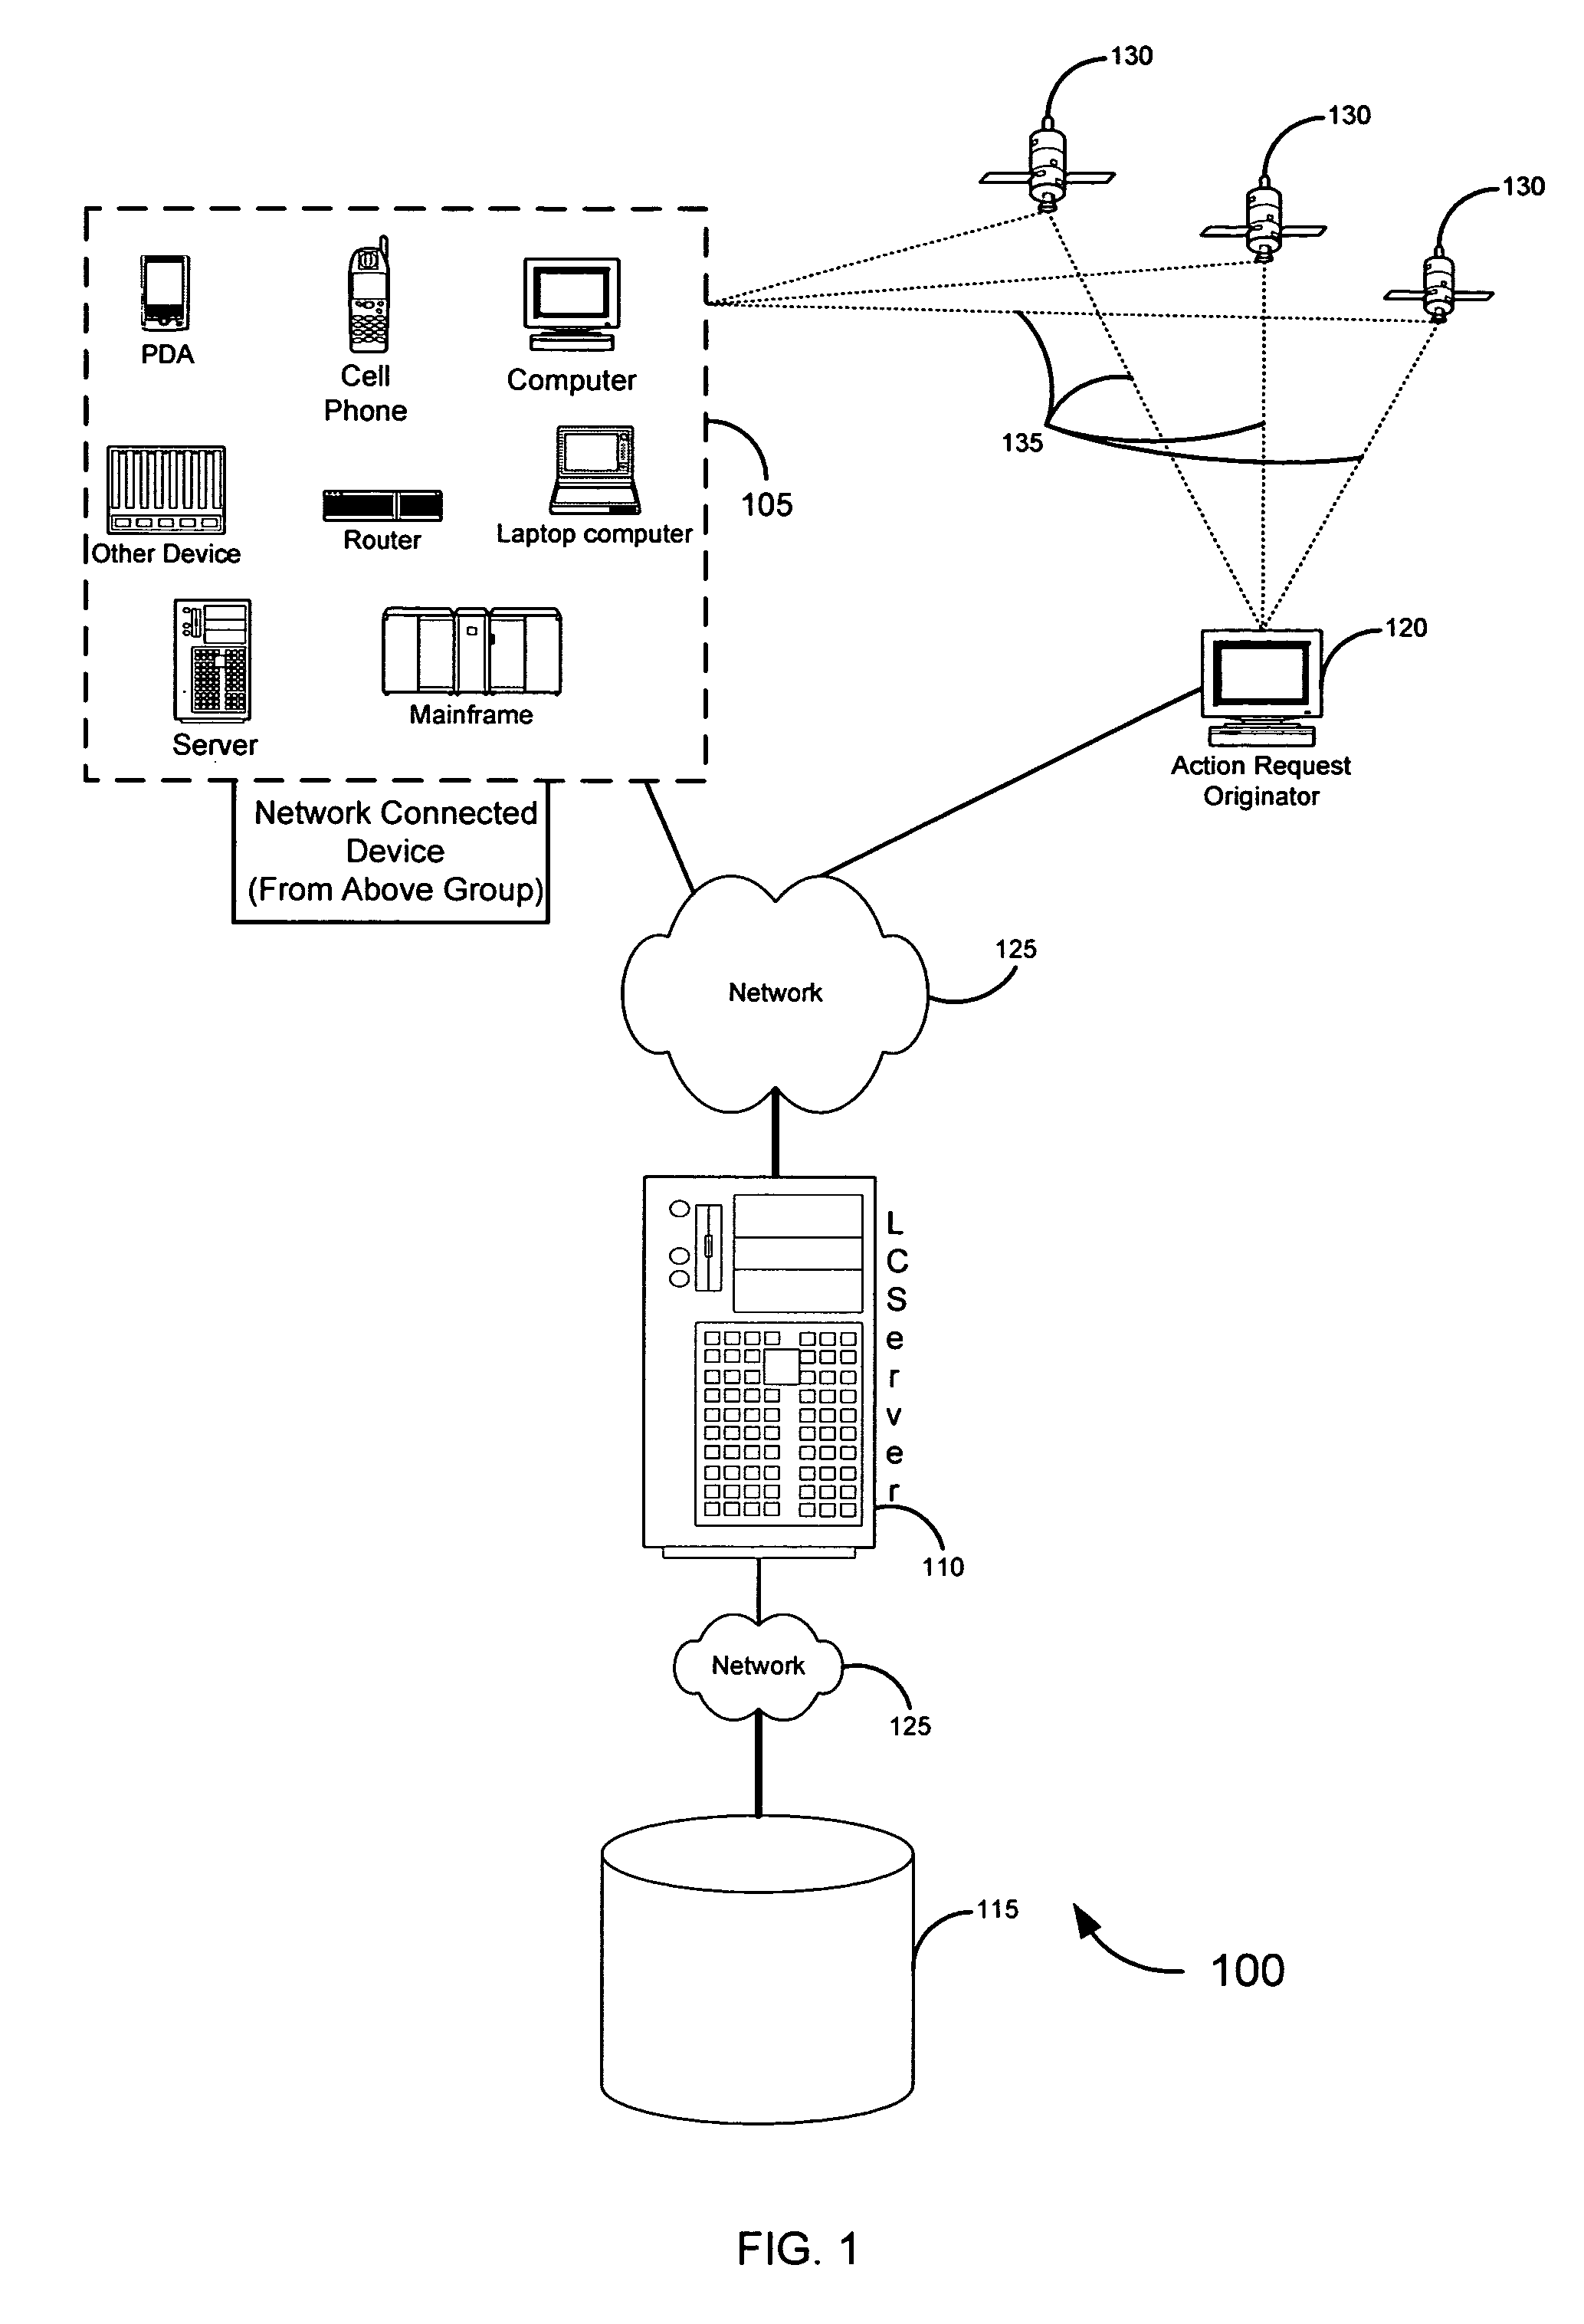 Location based authorization of financial card transactions systems and methods